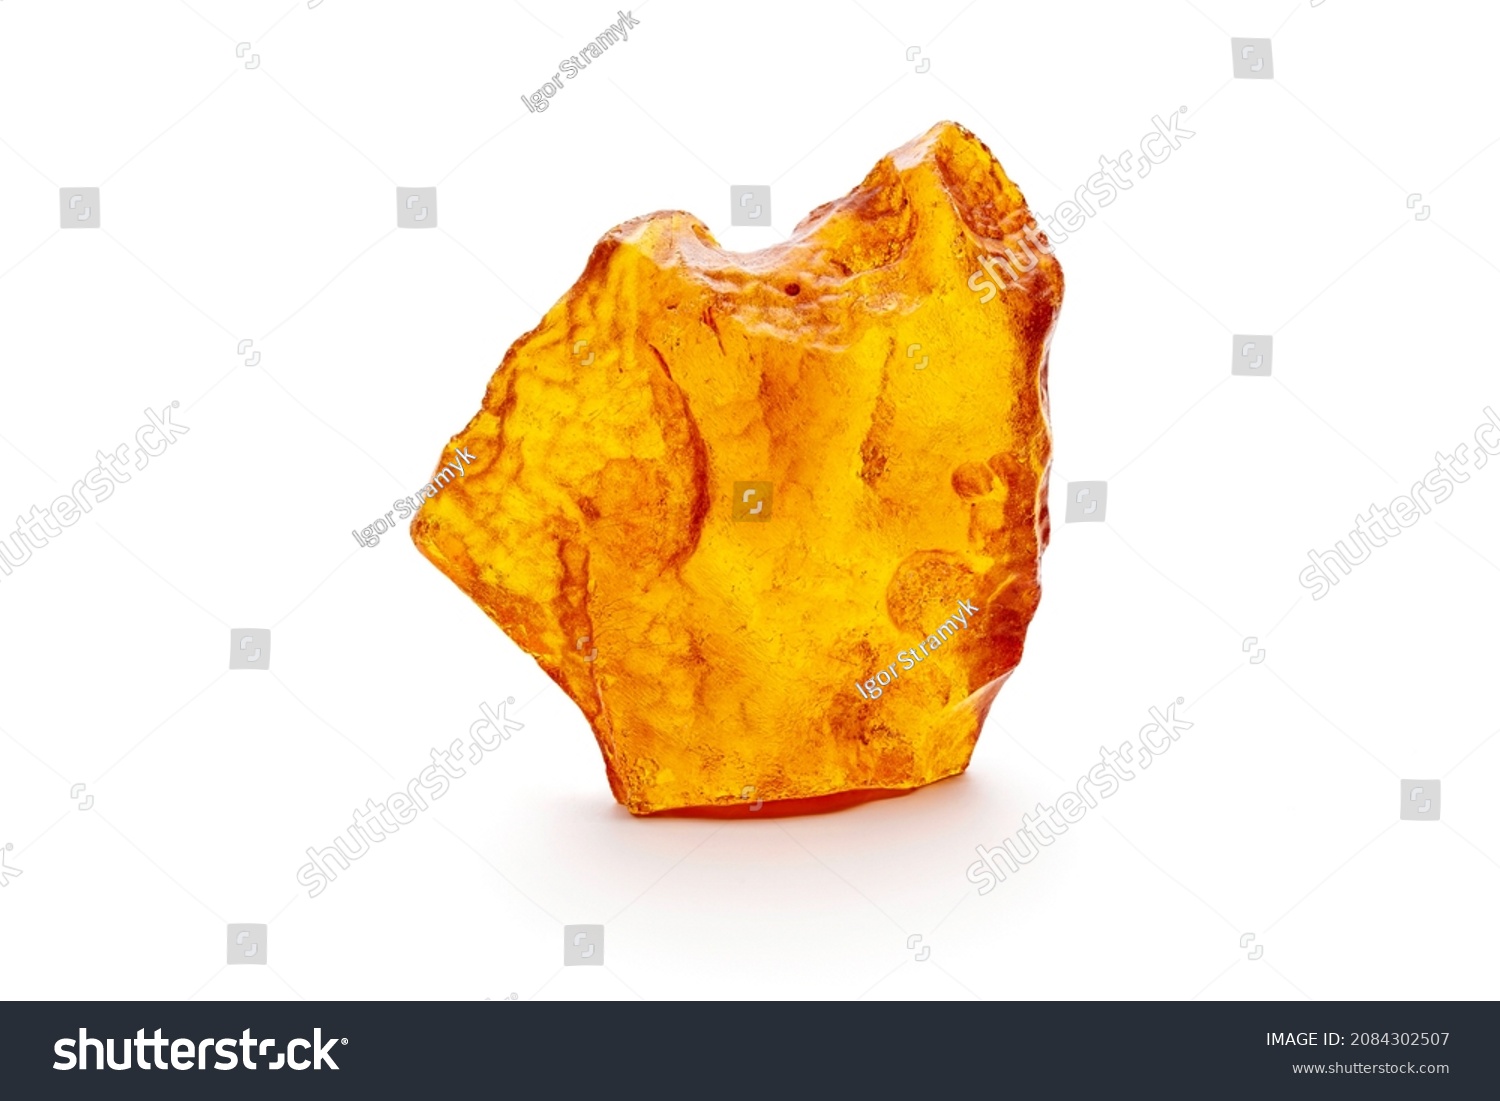 A piece of yellow opaque natural amber classification color Clear Succinite, has superficial cracks on its surface. Placed on white background. #2084302507